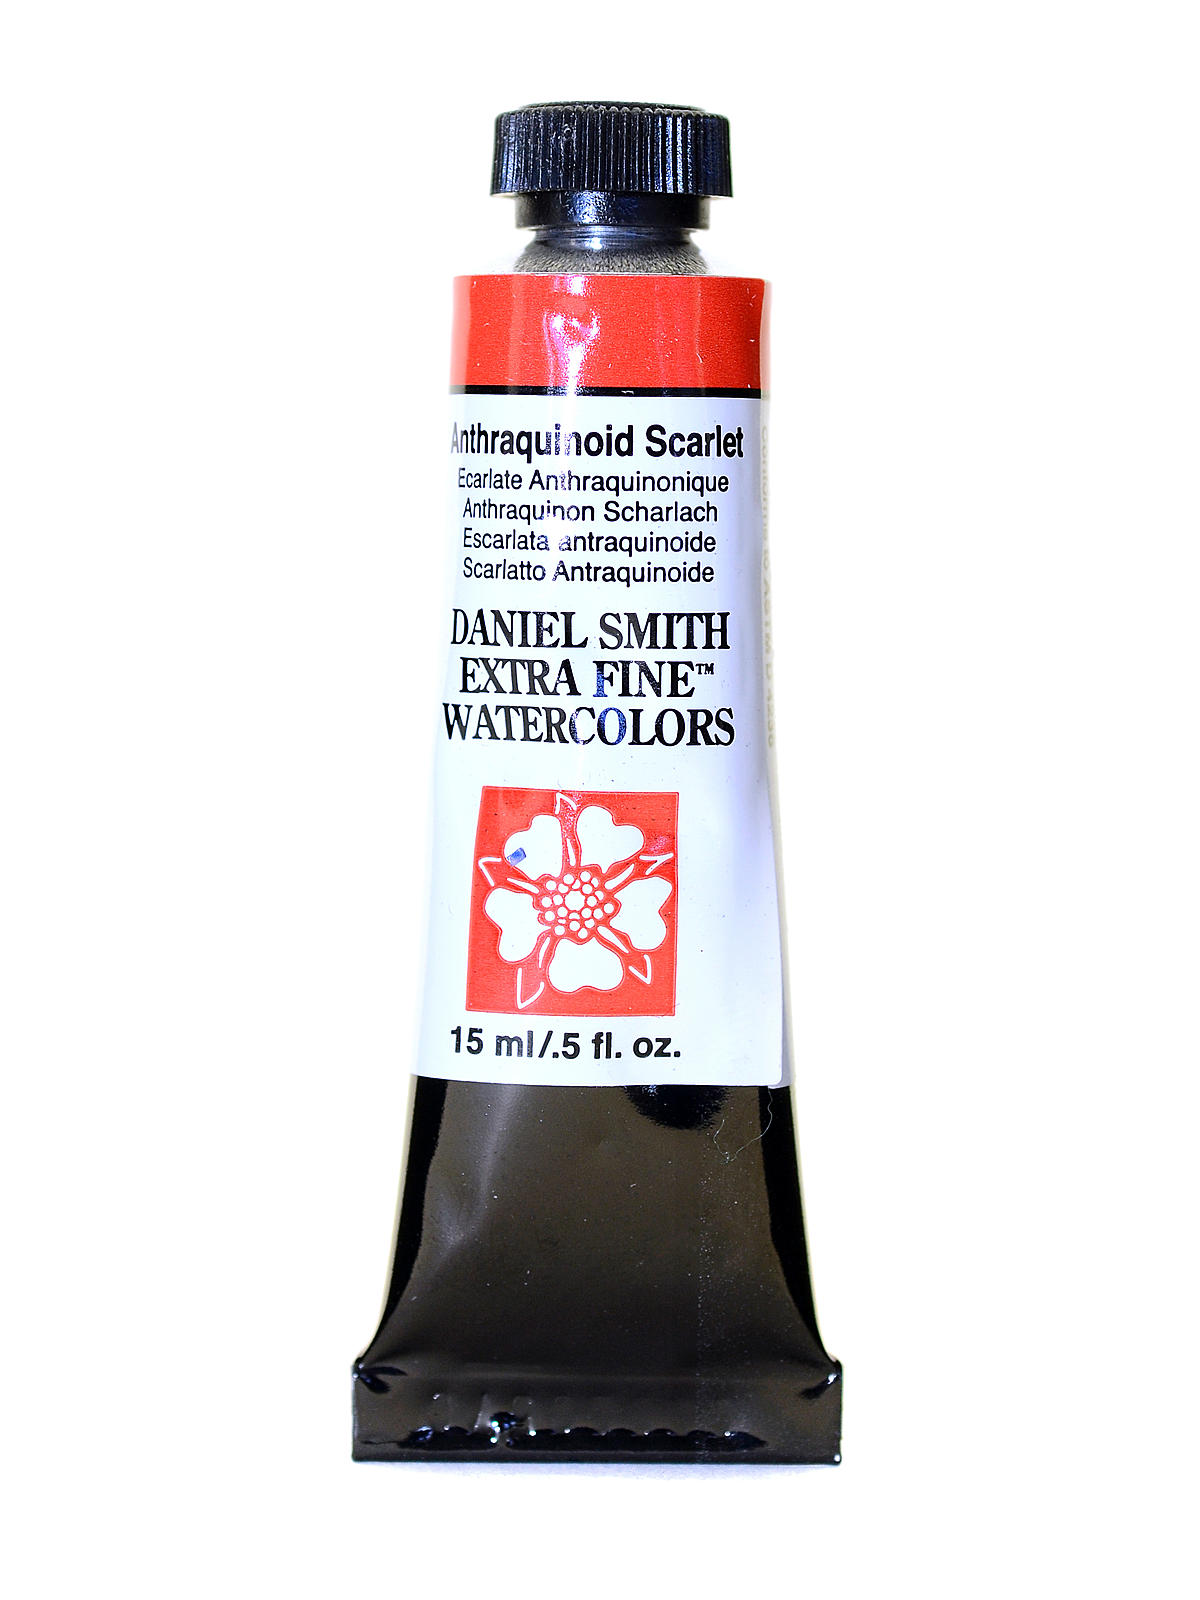 Extra Fine Watercolors Anthraquinoid Scarlet 15 Ml